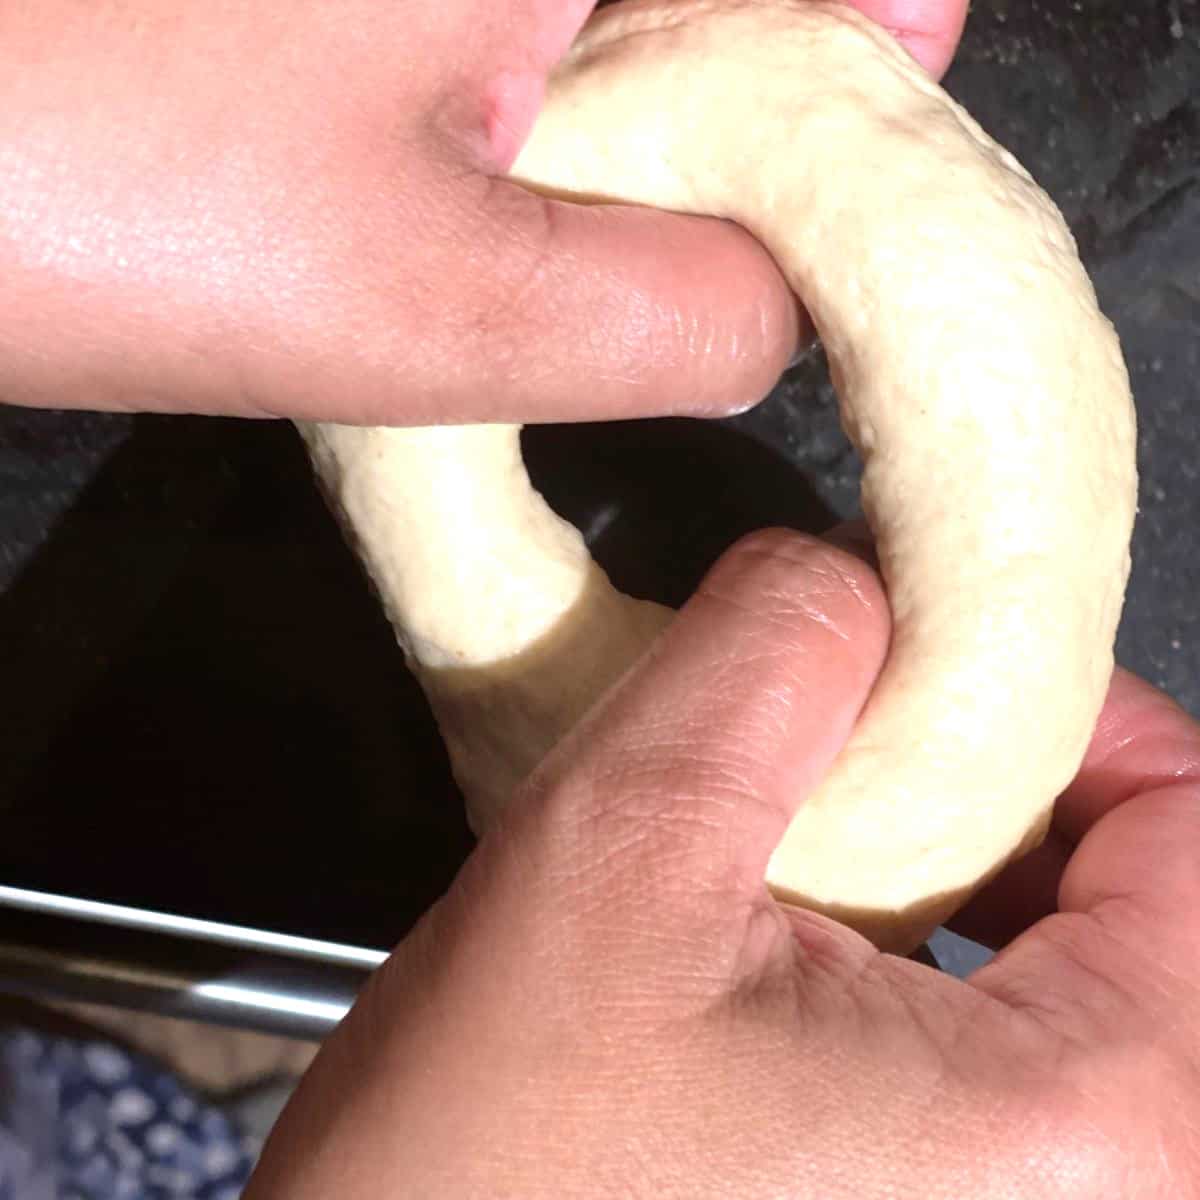 Bagel hole being shaped by hand.